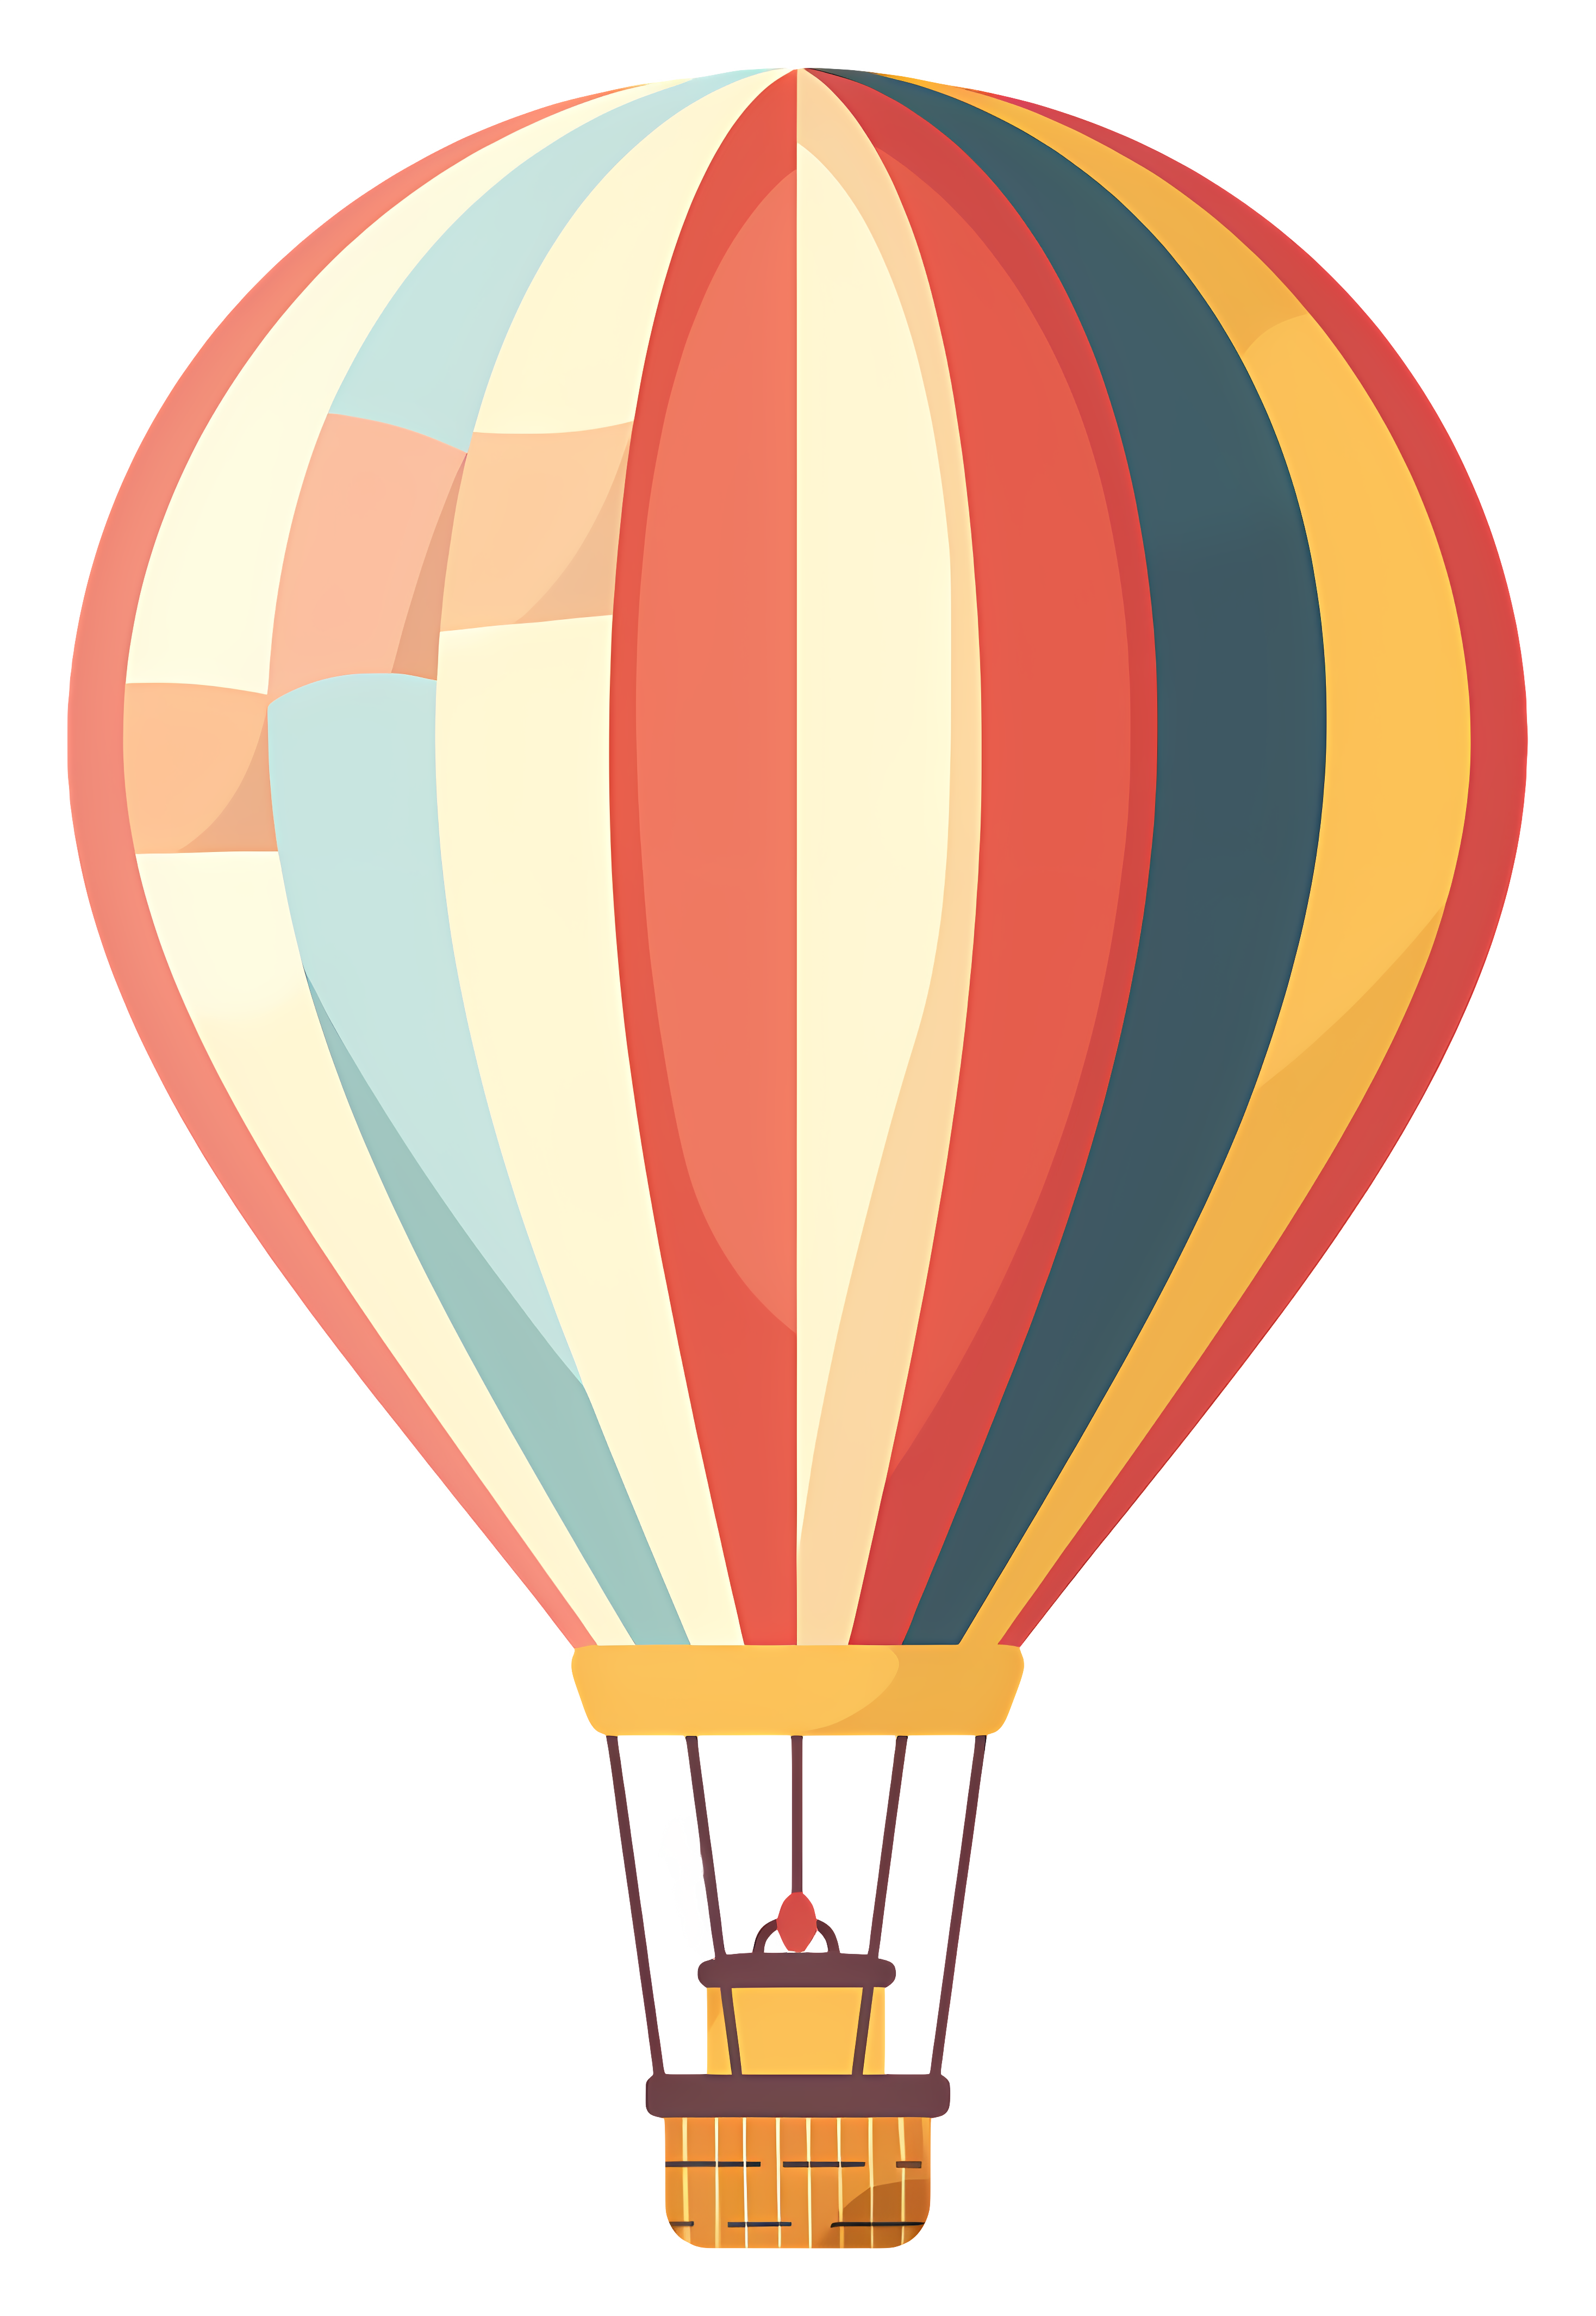 Colorful striped hot air balloon in sky Clipart